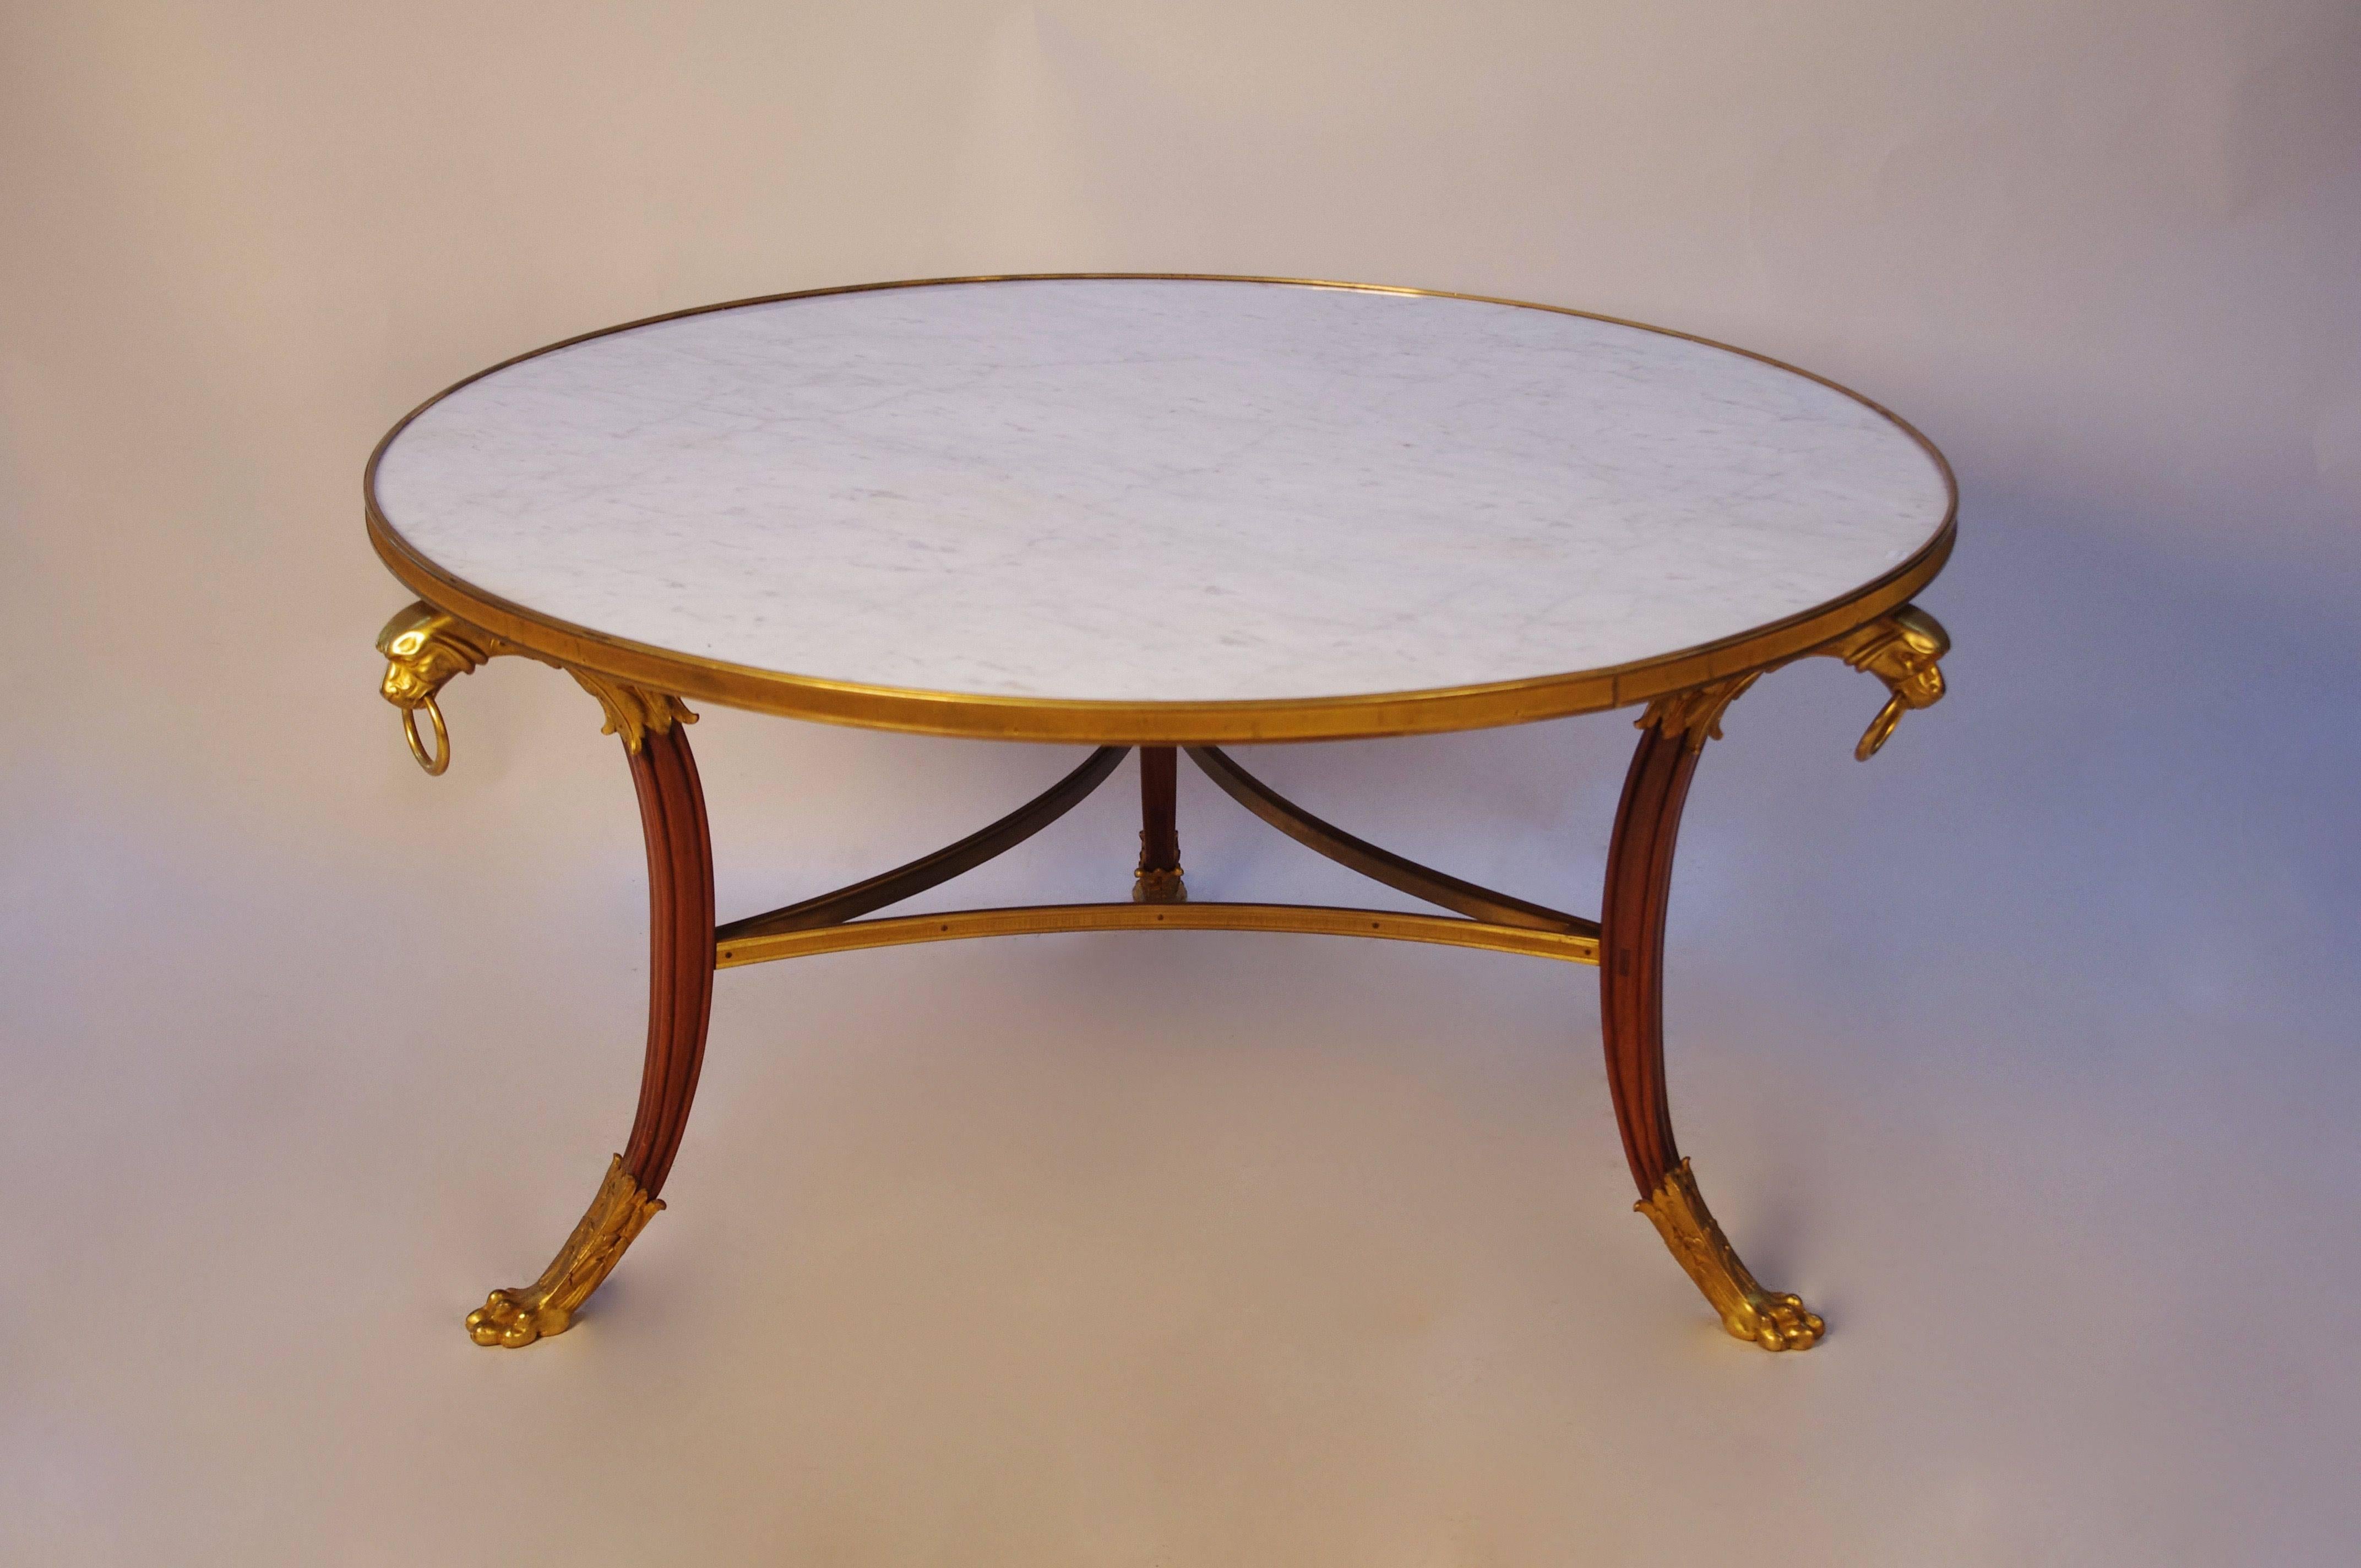 French Big Empire Style Round Coffee Table by Maison Rinck, circa 1950